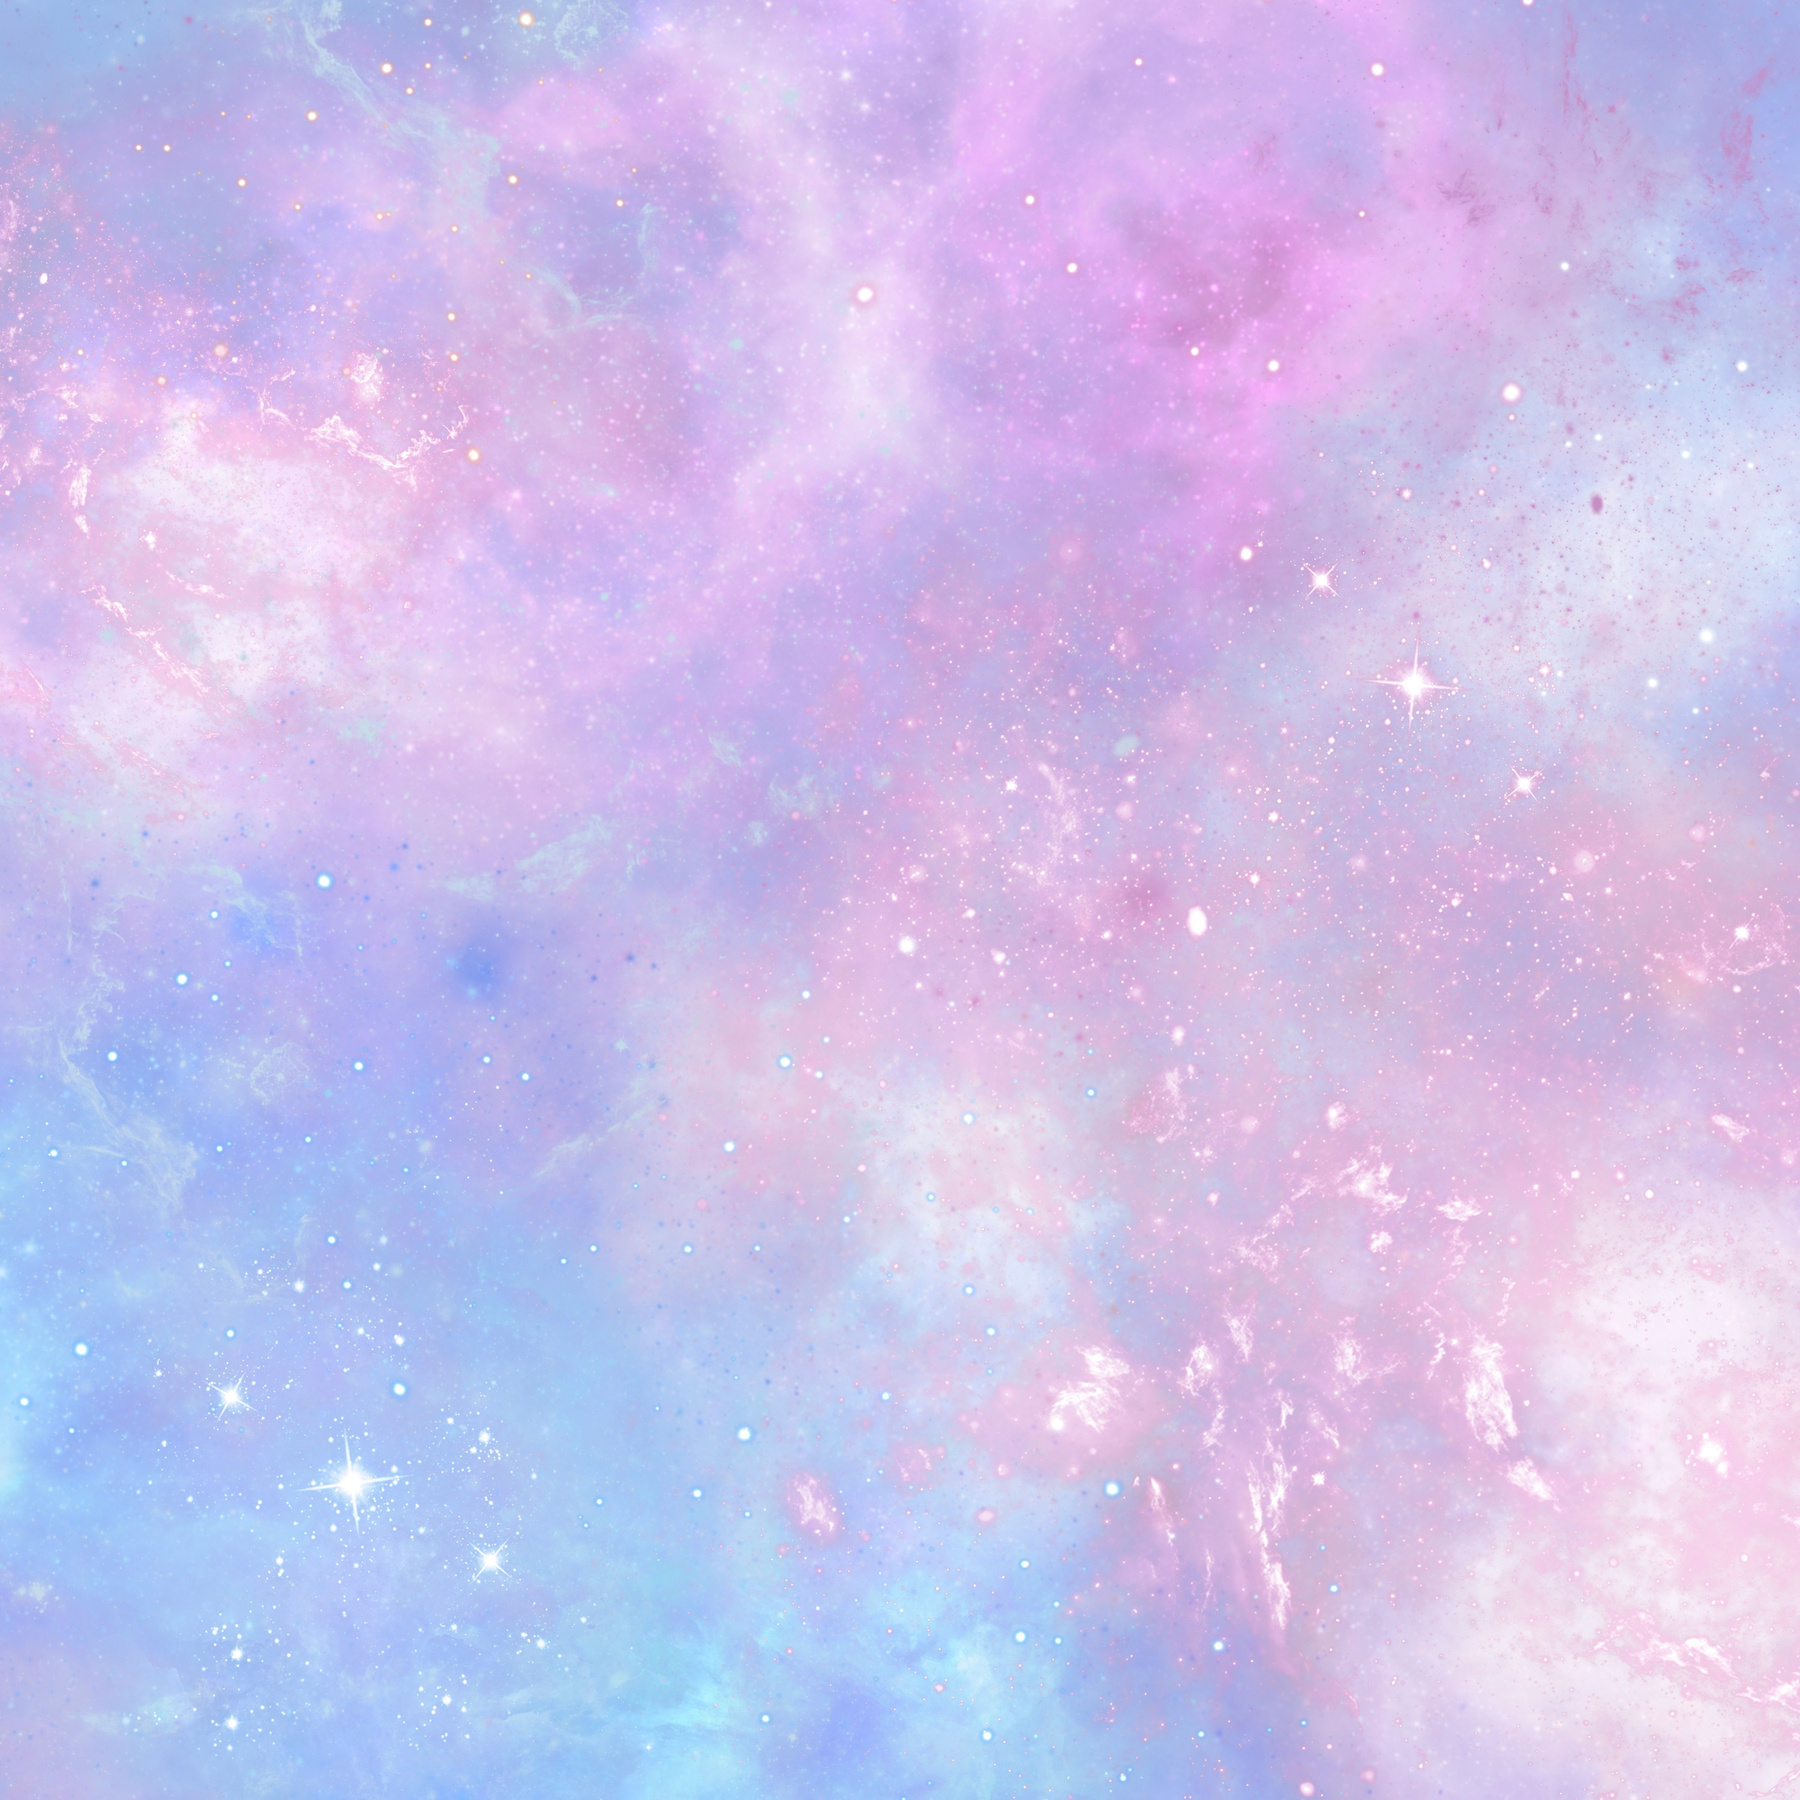 Space Galaxy Background